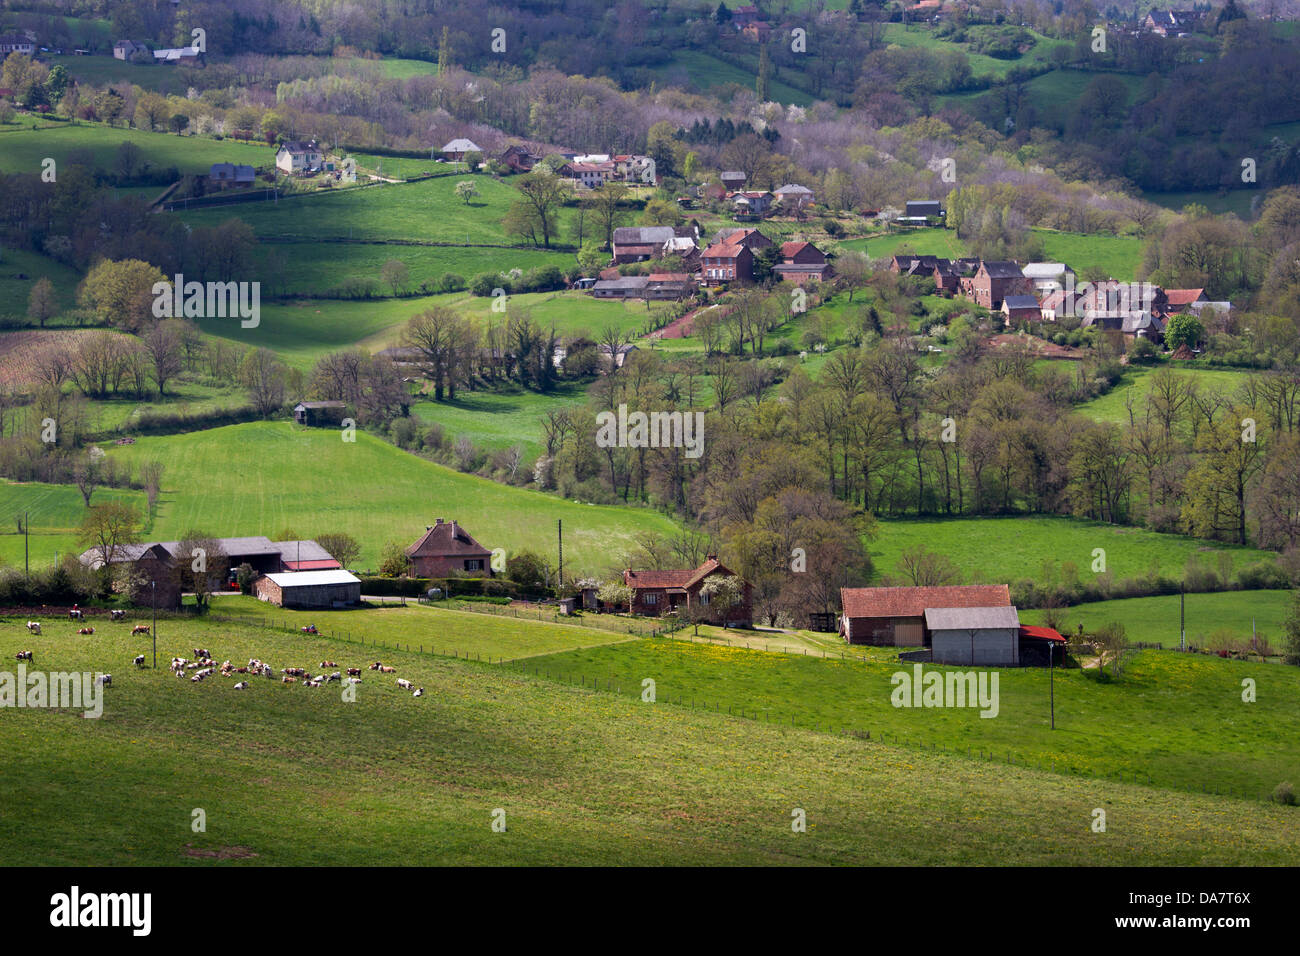 Bucolic landscape with hilly pastures, stone farmhouses, and cows grazing in Midi-Pyrenees region of France Stock Photo